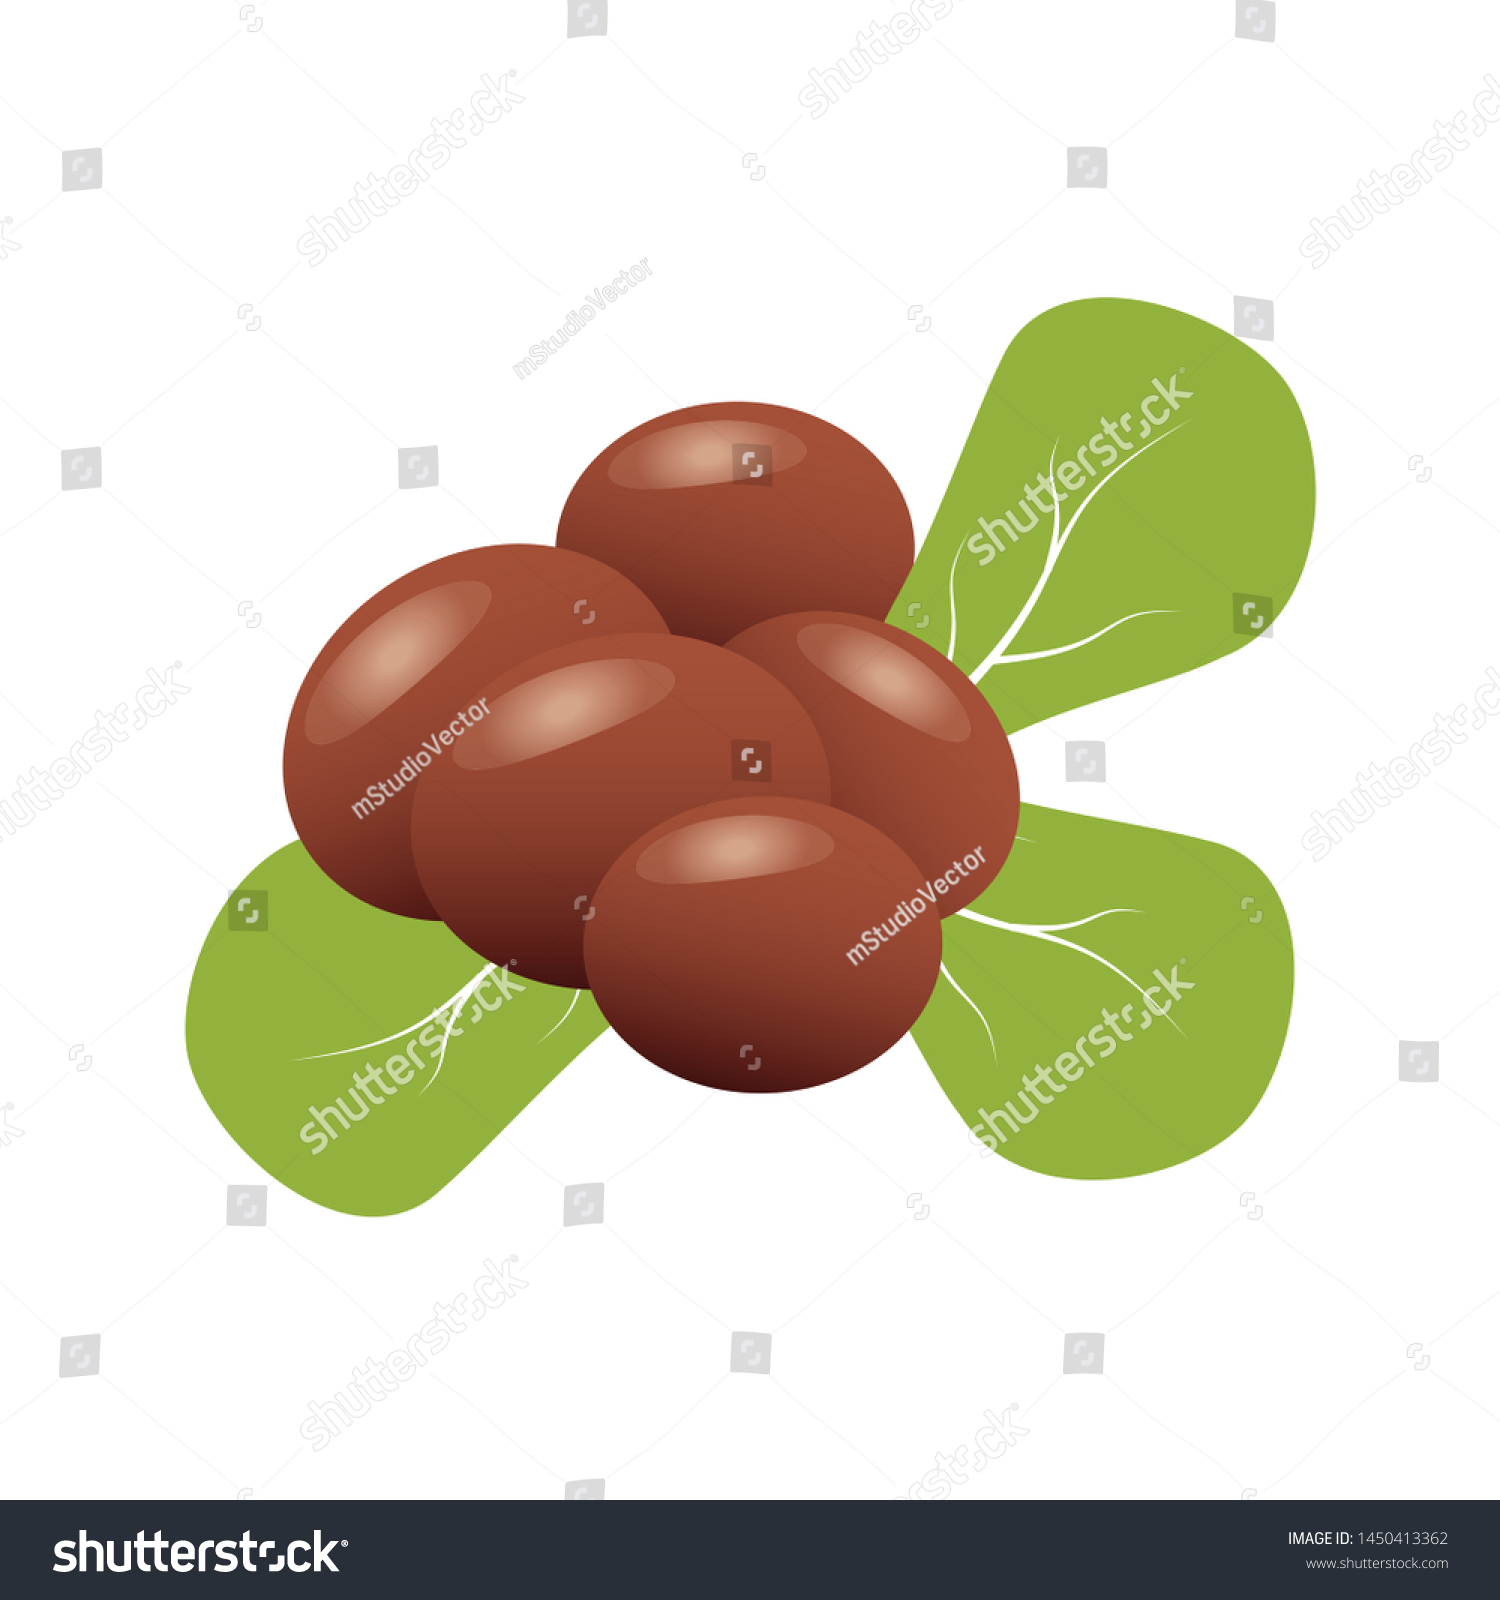 SVG of Shea butter. Shea nuts with green leaves svg